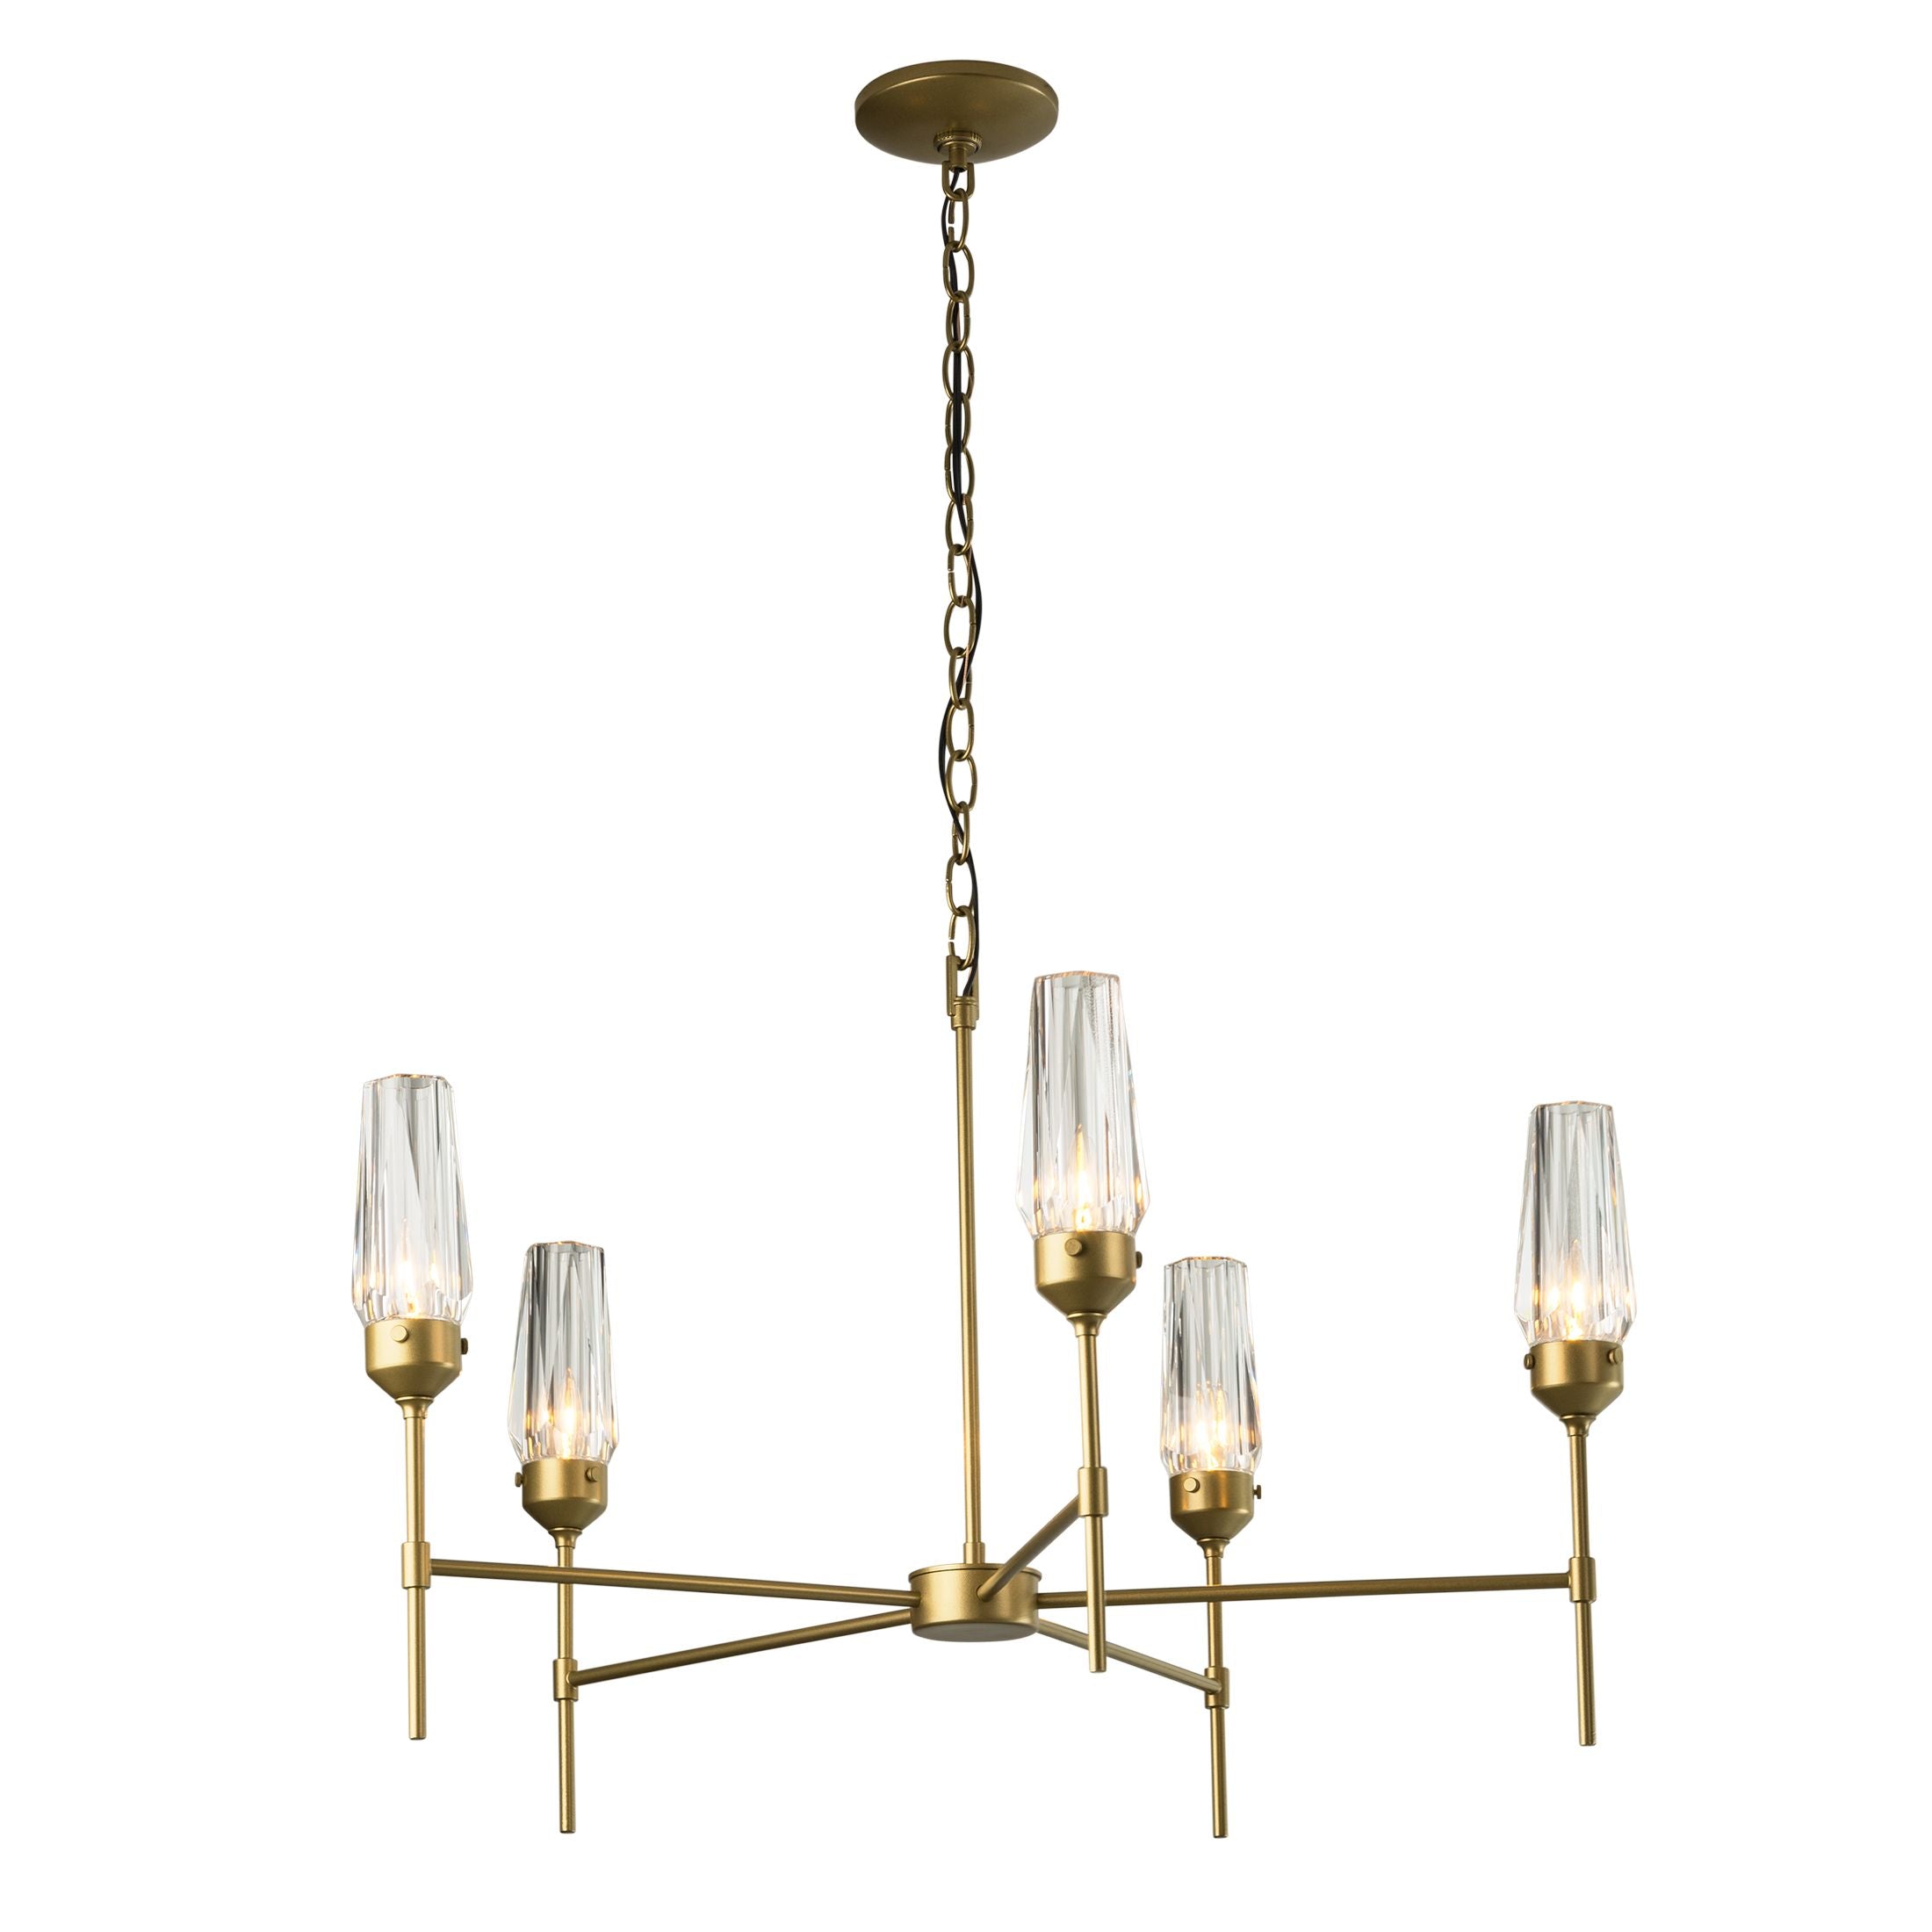 Luma 5 Arm Chandelier in gold finish from Synchronicity by Hubbardton Forge